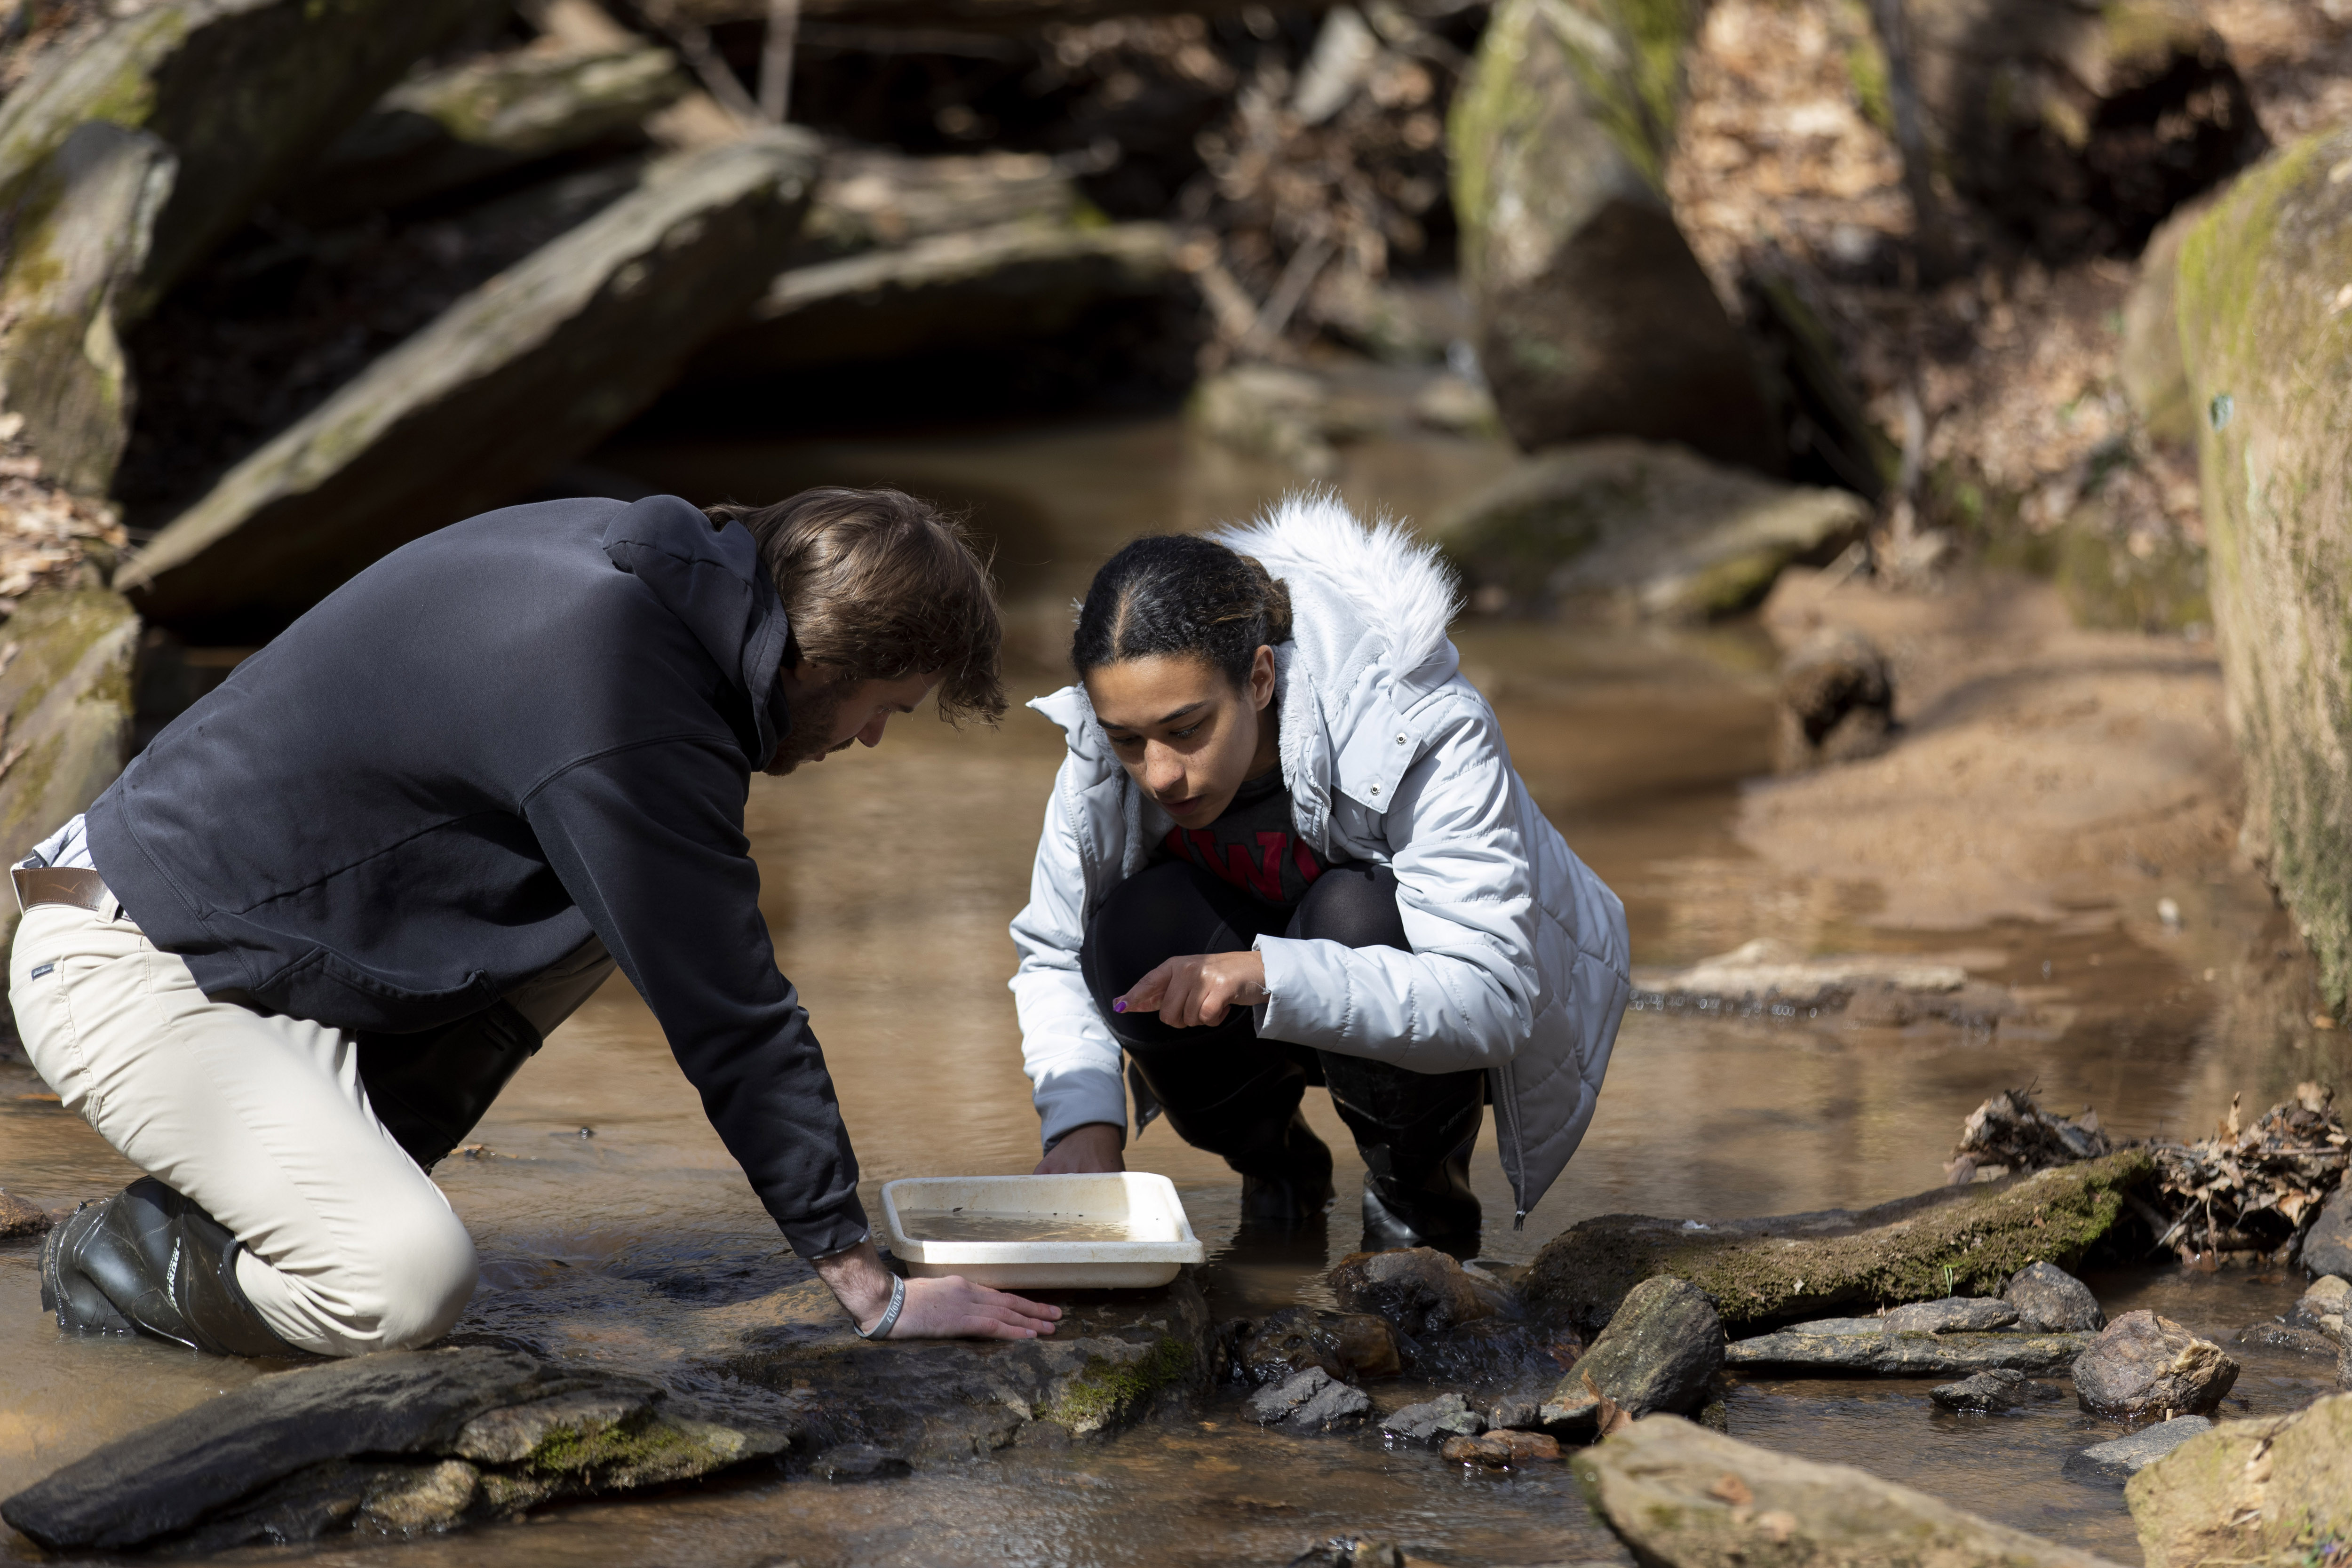 (L-R) Undergraduates William Churchwell and Cierra White look for small animals and bugs in a sampling tray as they sample as part of their Stream Ecology Lab in a stream off the orange trail at the State Botanical Gardens.